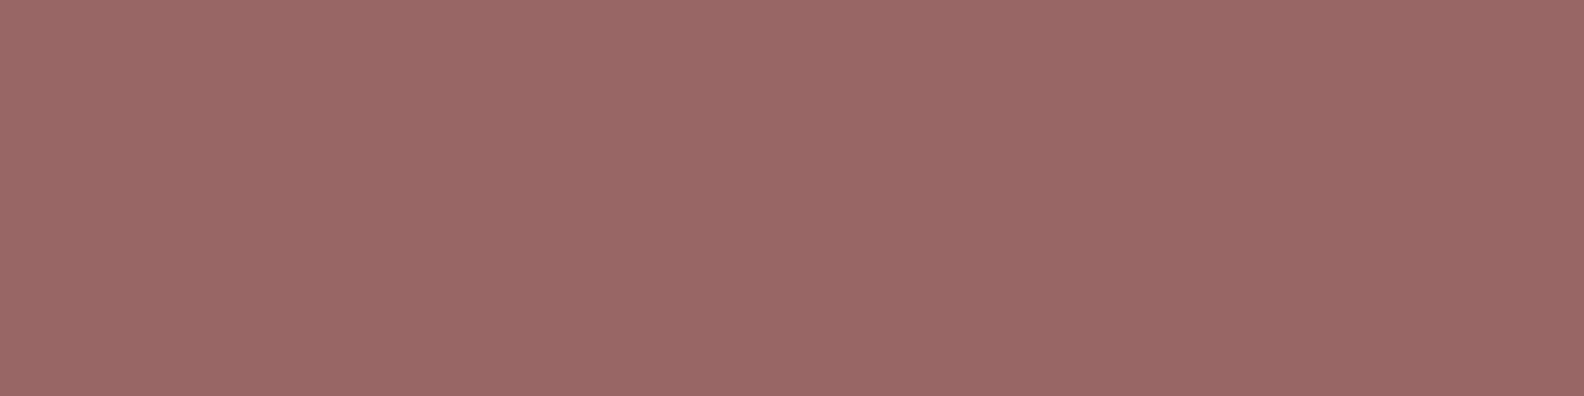 1584x396 Copper Rose Solid Color Background